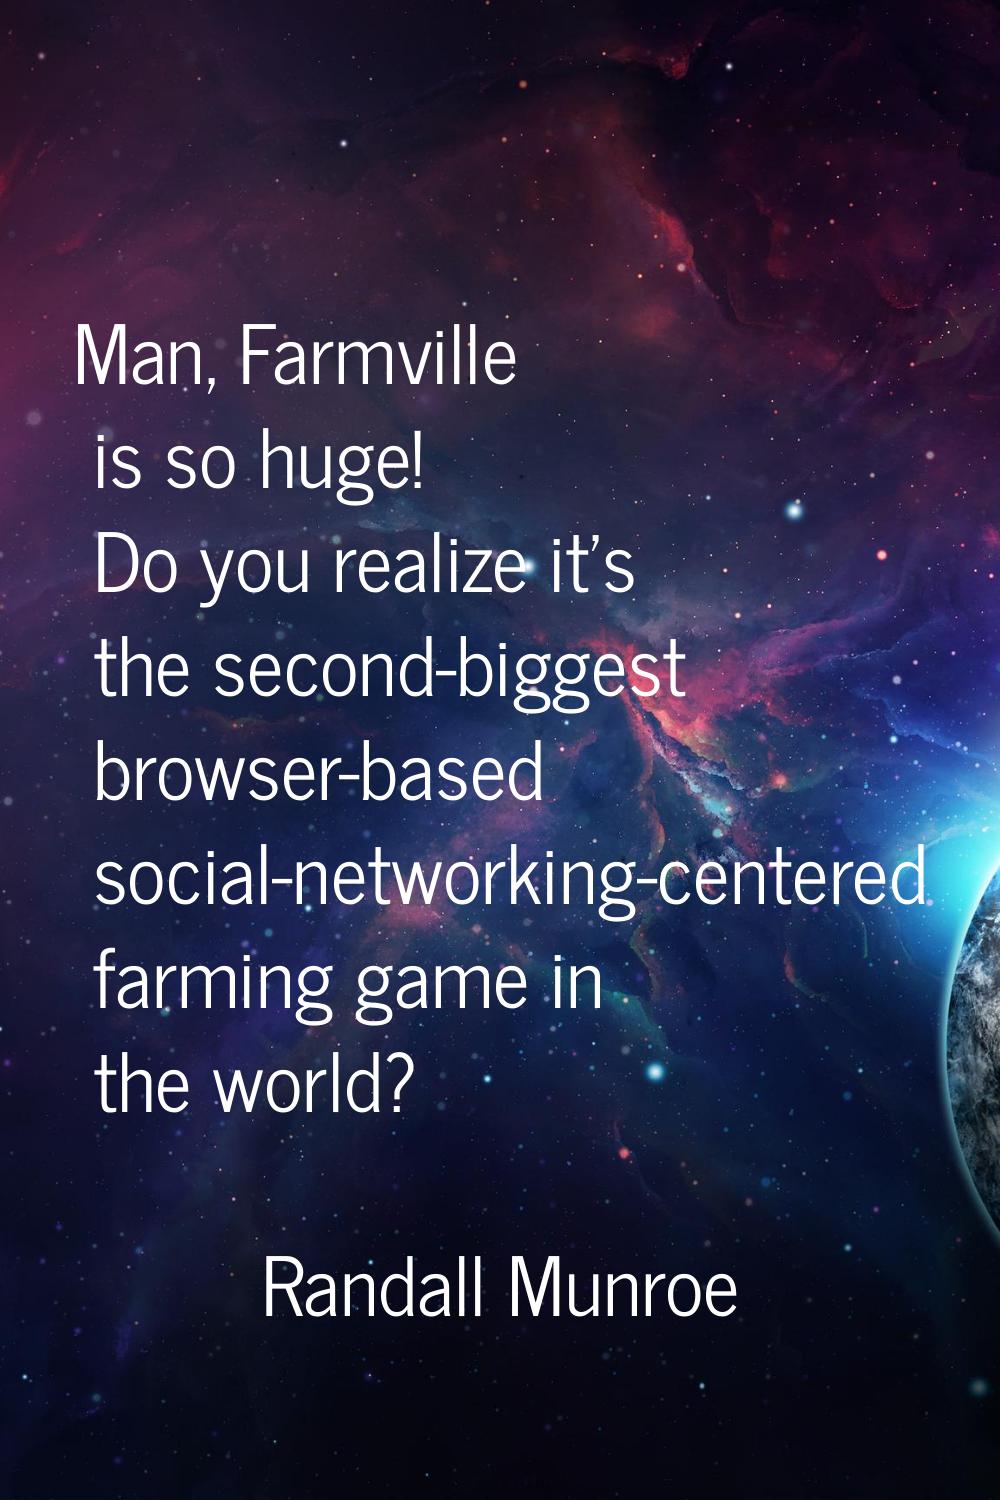 Man, Farmville is so huge! Do you realize it's the second-biggest browser-based social-networking-c